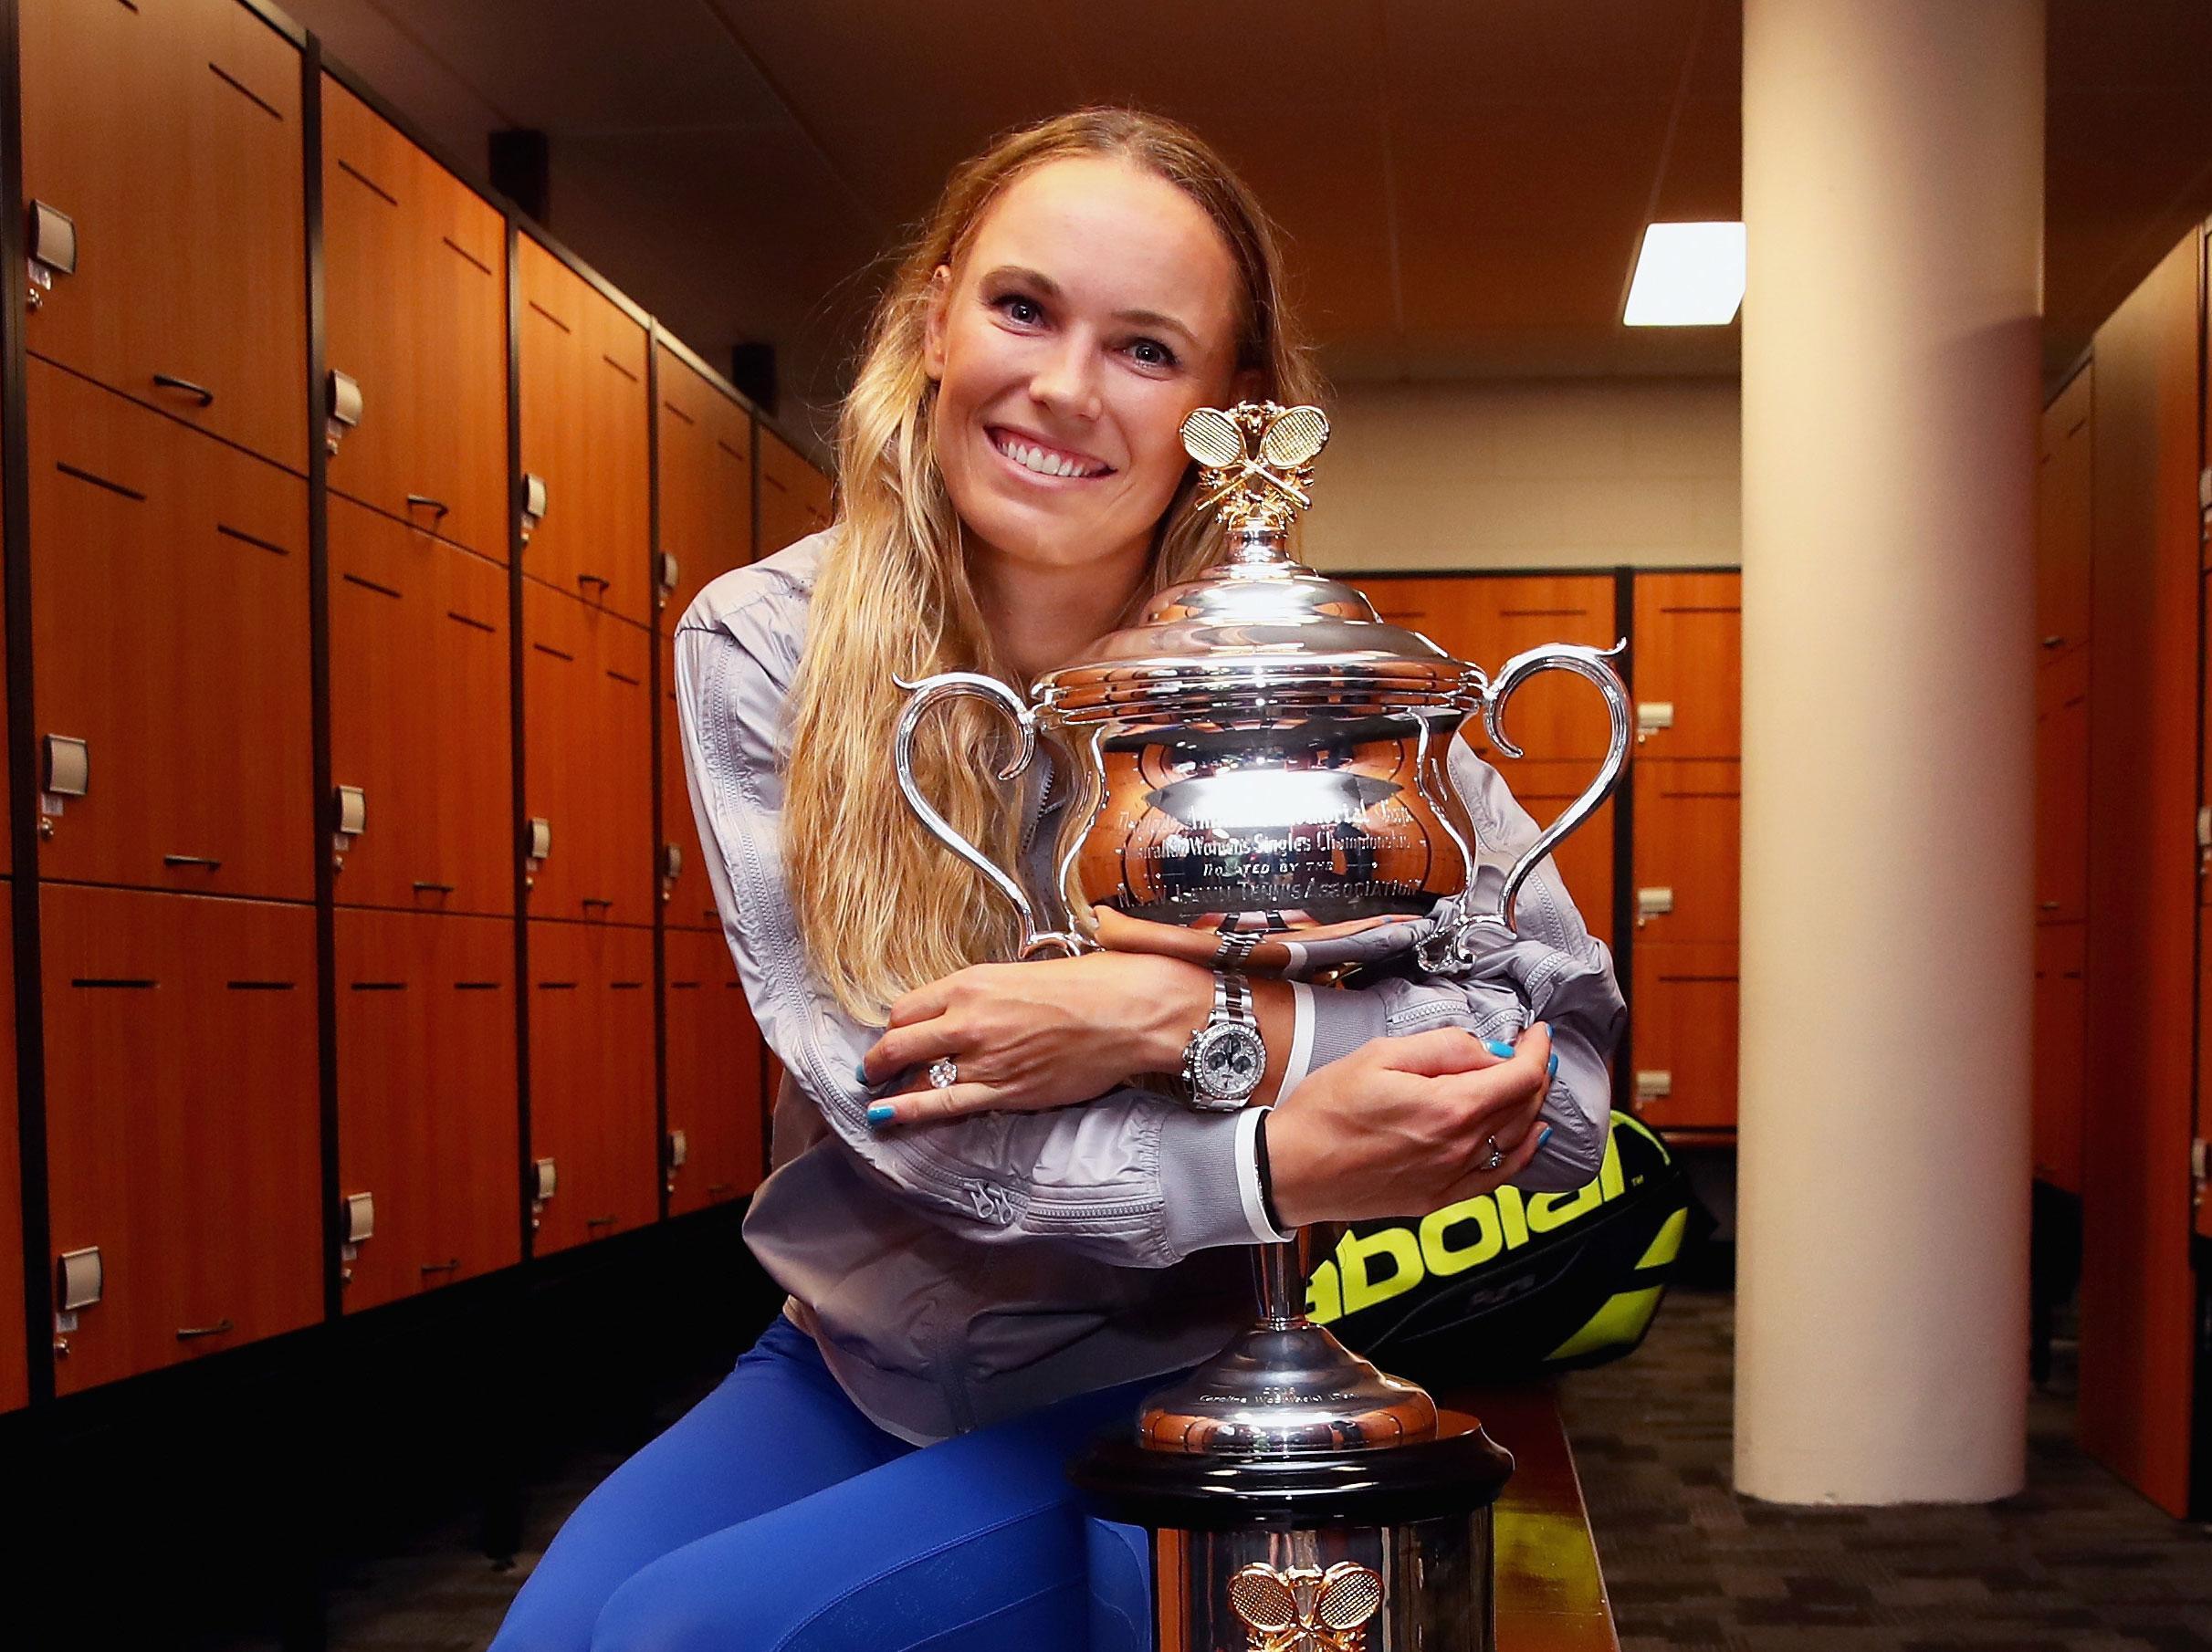 Wozniacki will go back to world no 1 - but this time with a Grand Slam